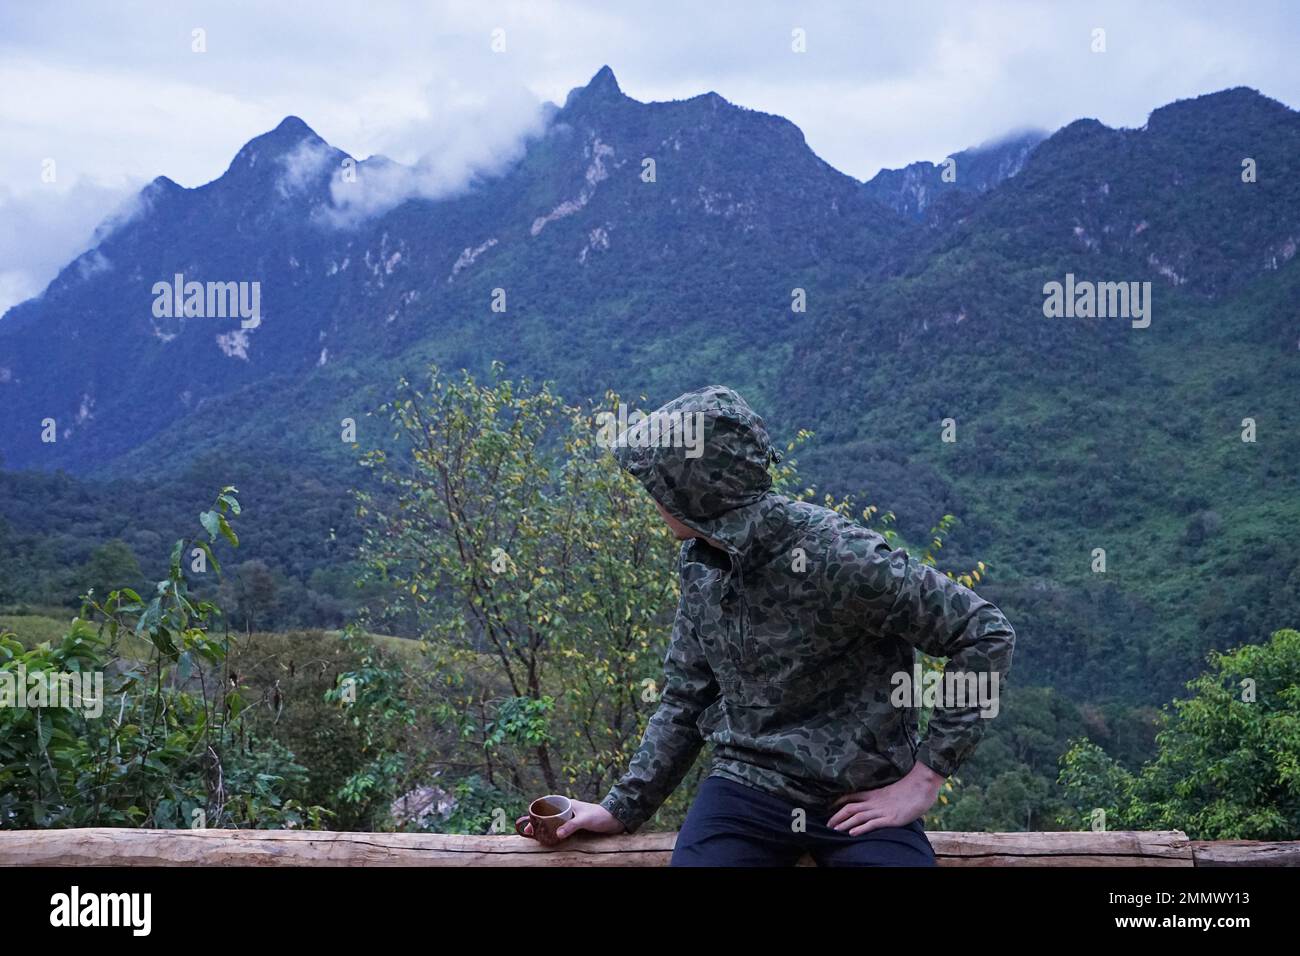 A man on the peak looking at green mountain range with cloudy sky Stock Photo